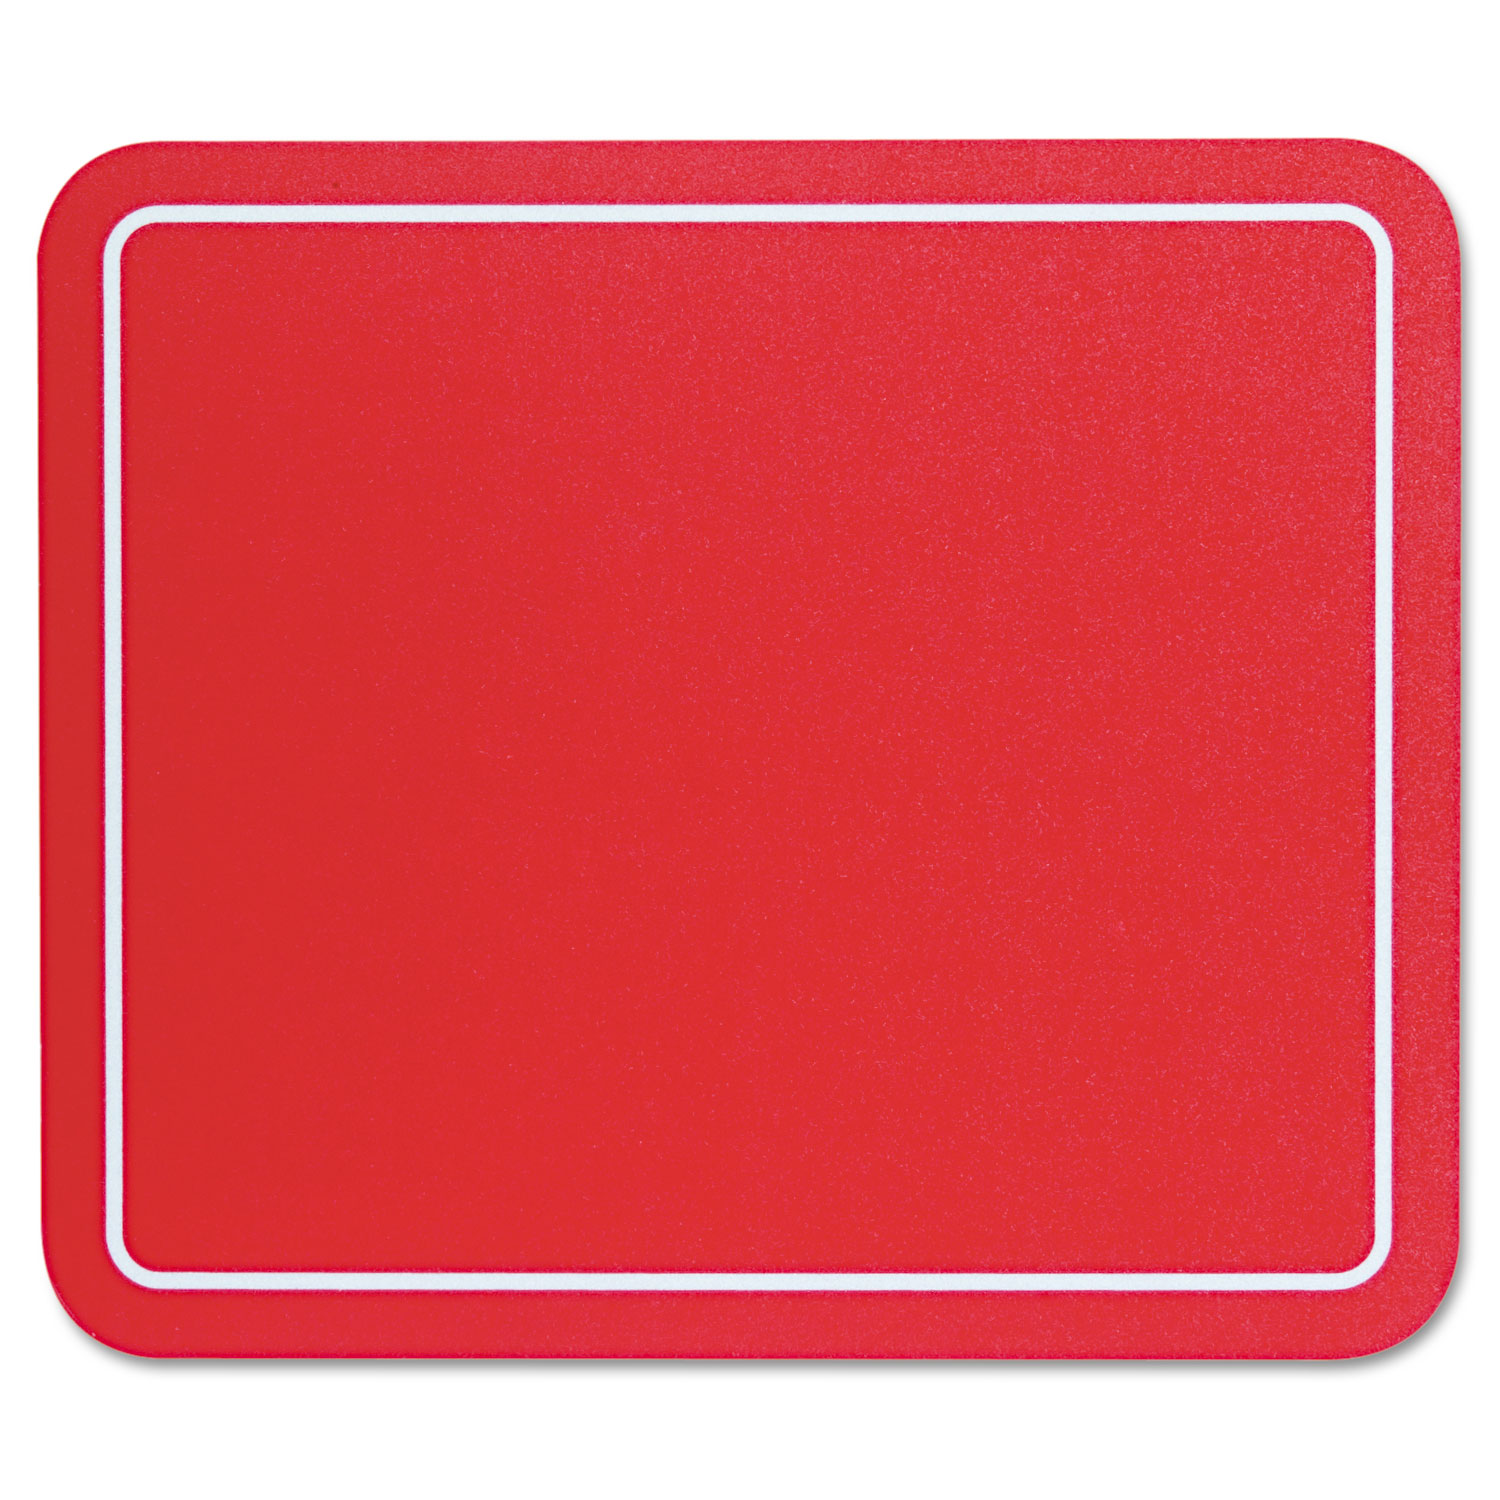 Optical Mouse Pad, 9 x 7-3/4 x 1/8, Red